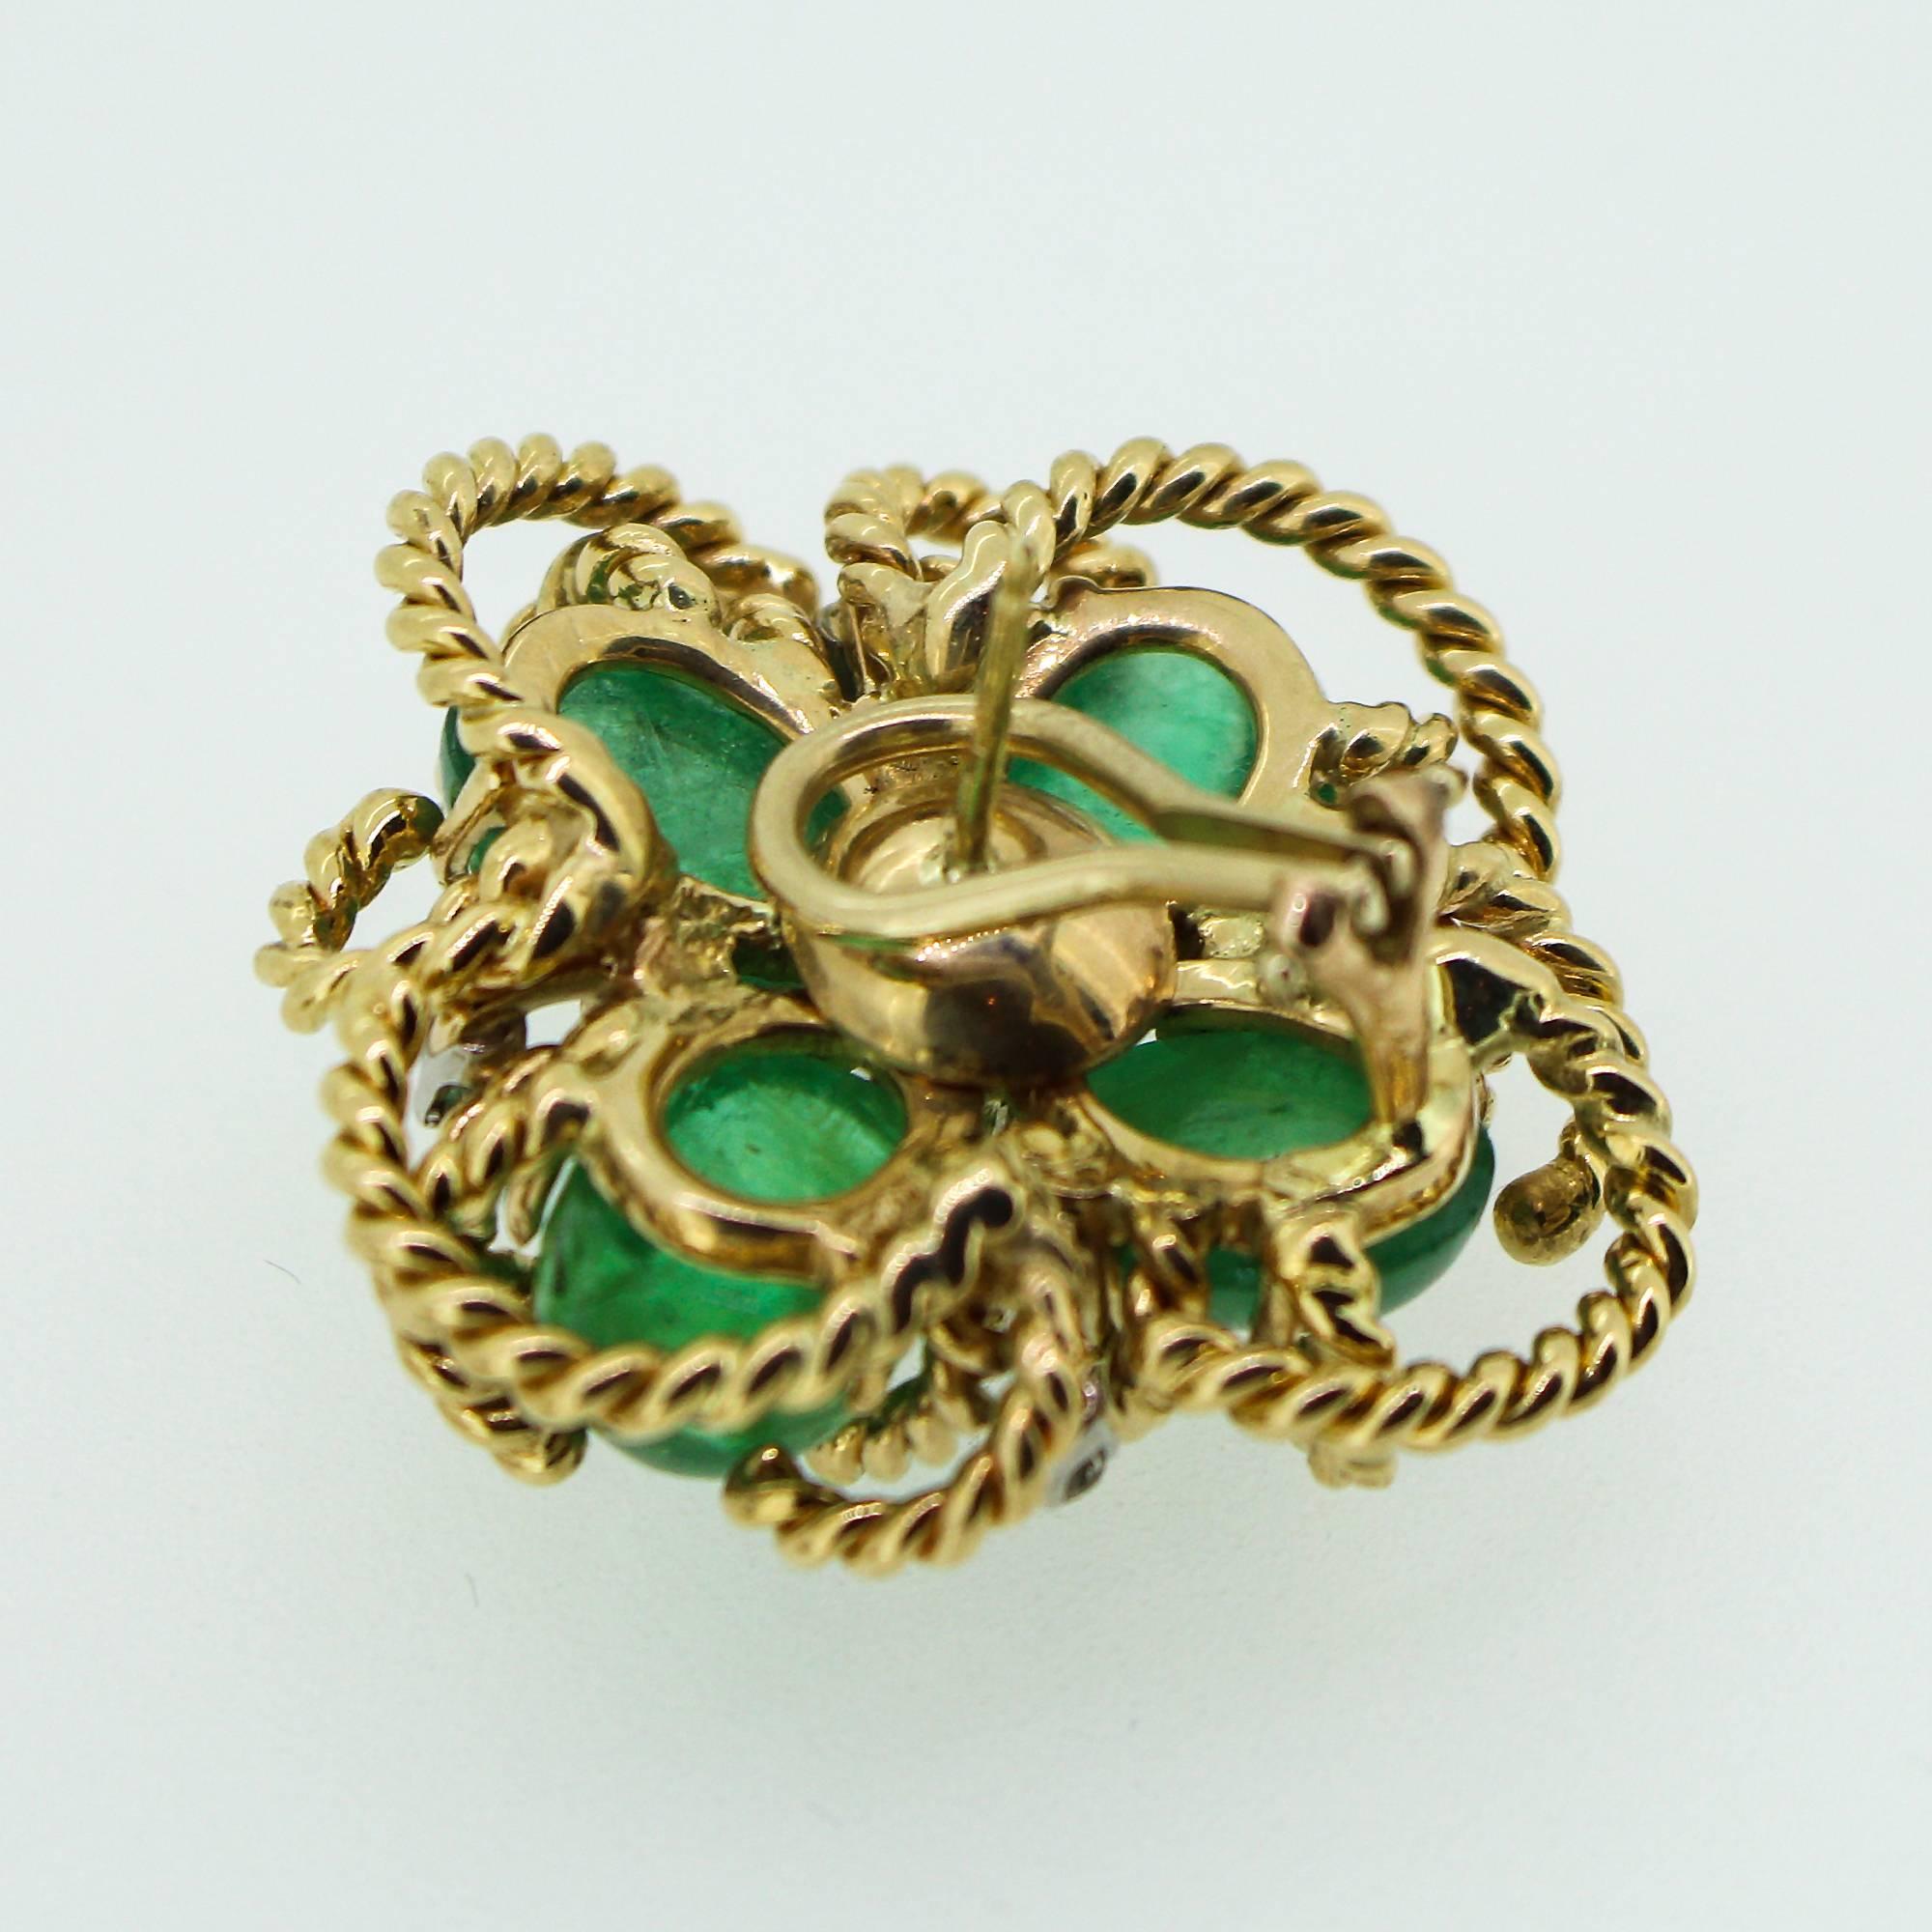 These beautiful 1970s Modernist earrings feature a 14k yellow gold textured cable cluster holding in place 4 cabochon cut emeralds in each earring, in what resembles a clover-style design. In the center of each earring sits an old mine cut diamond